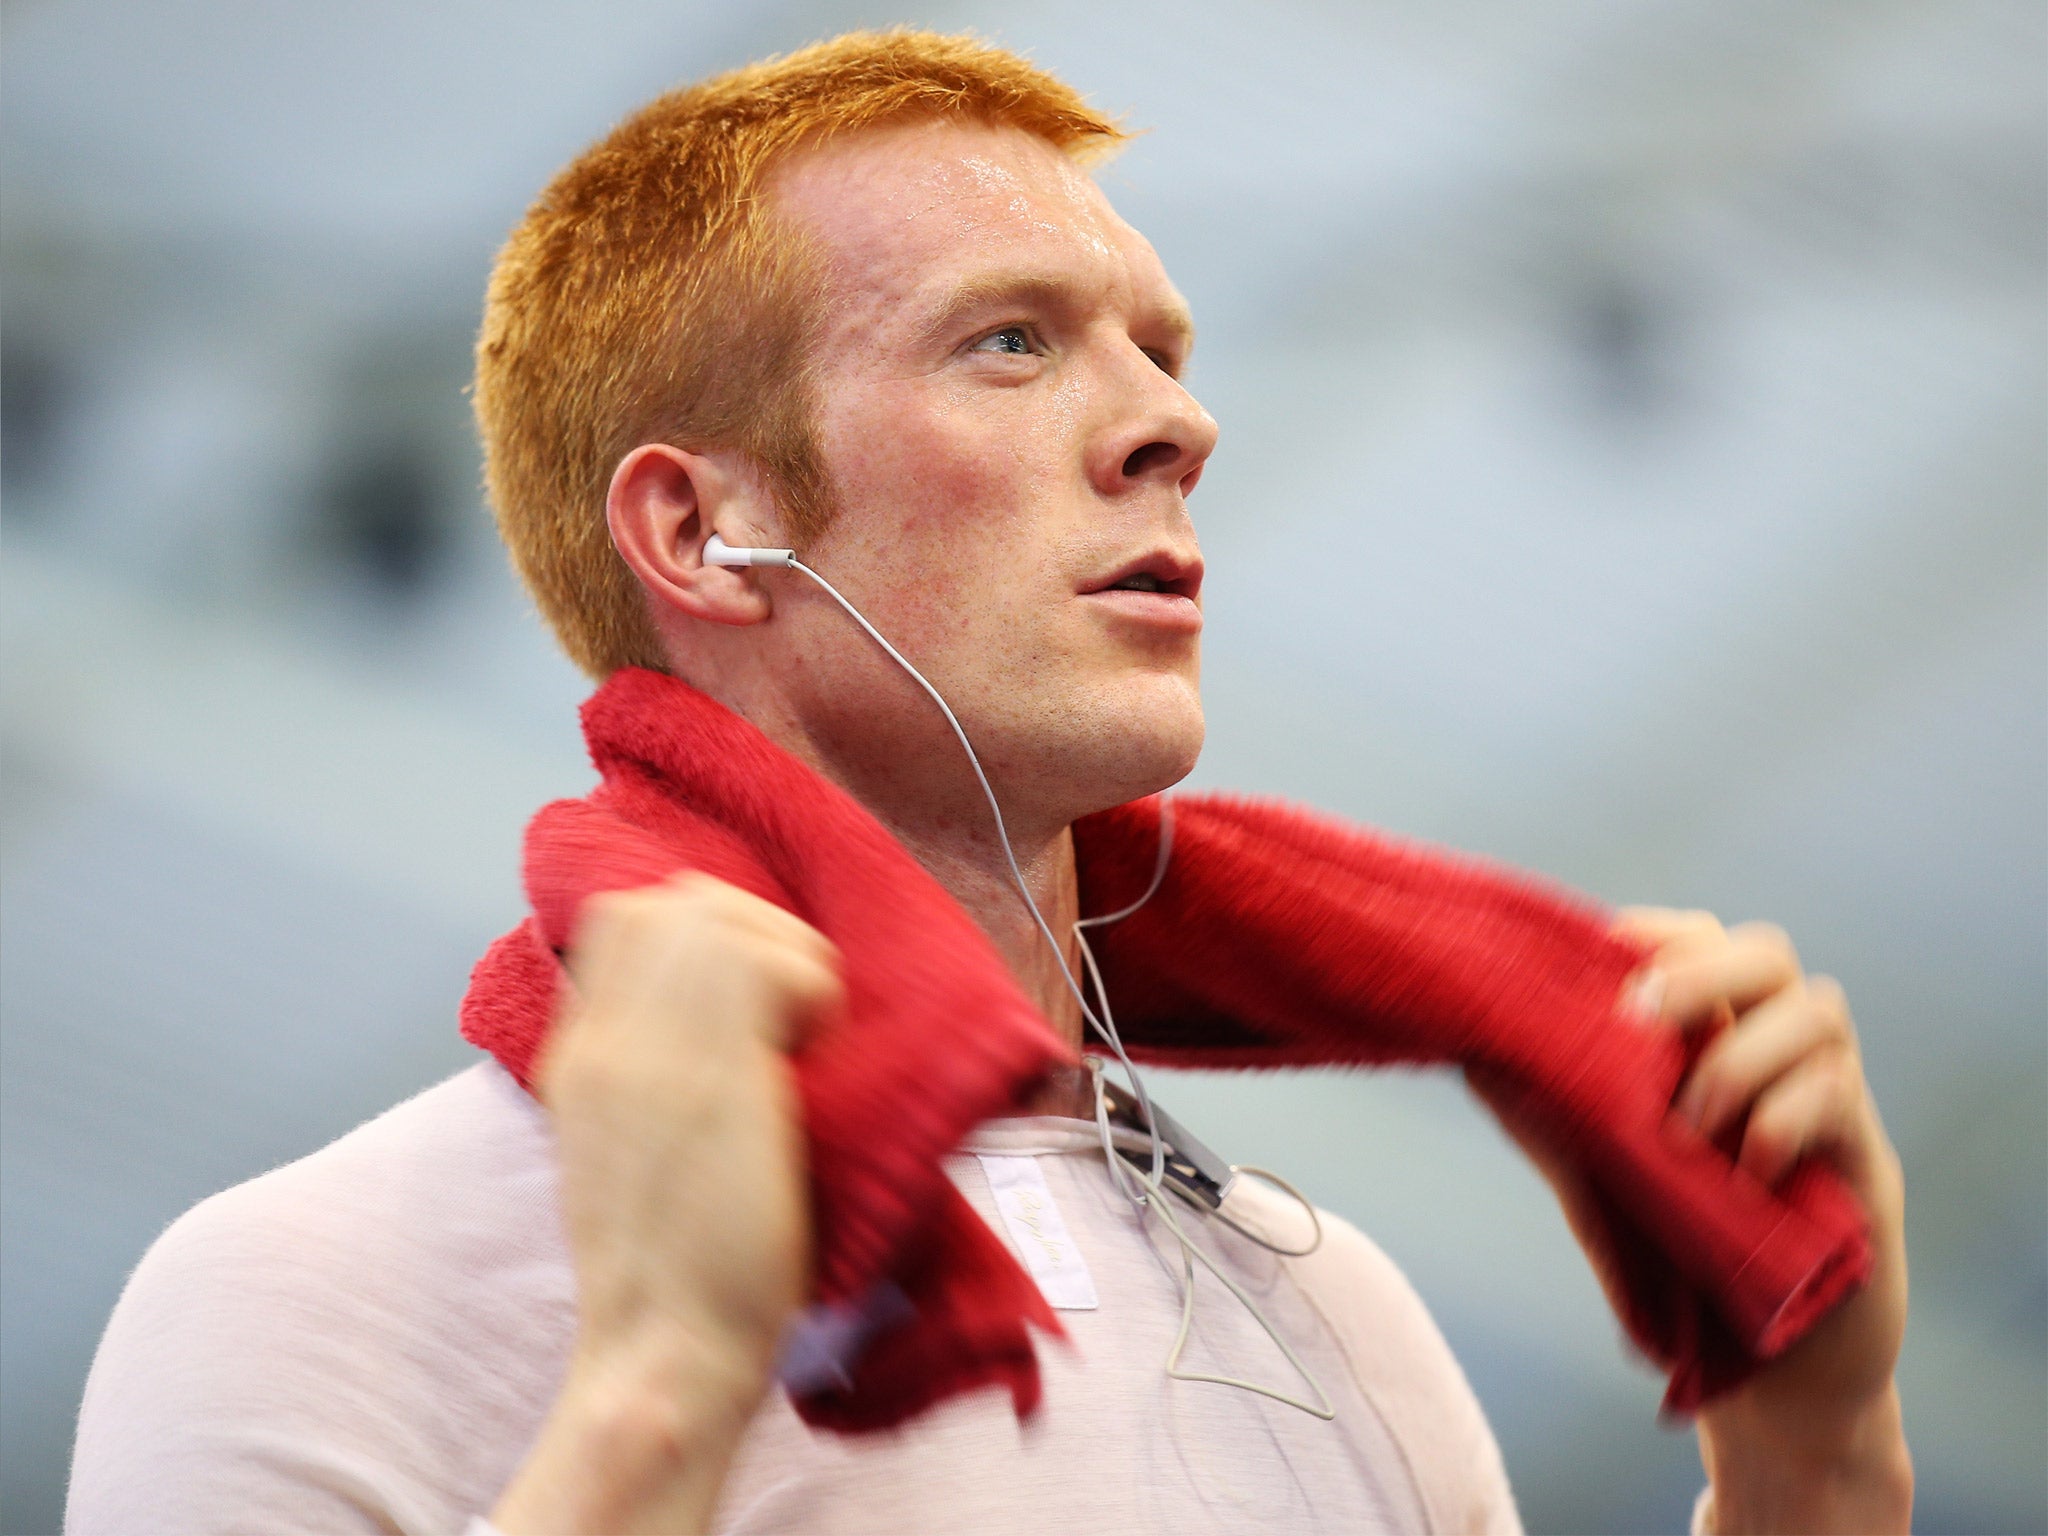 Ed Clancy is now the most senior figure in the team that competes in Cali this week